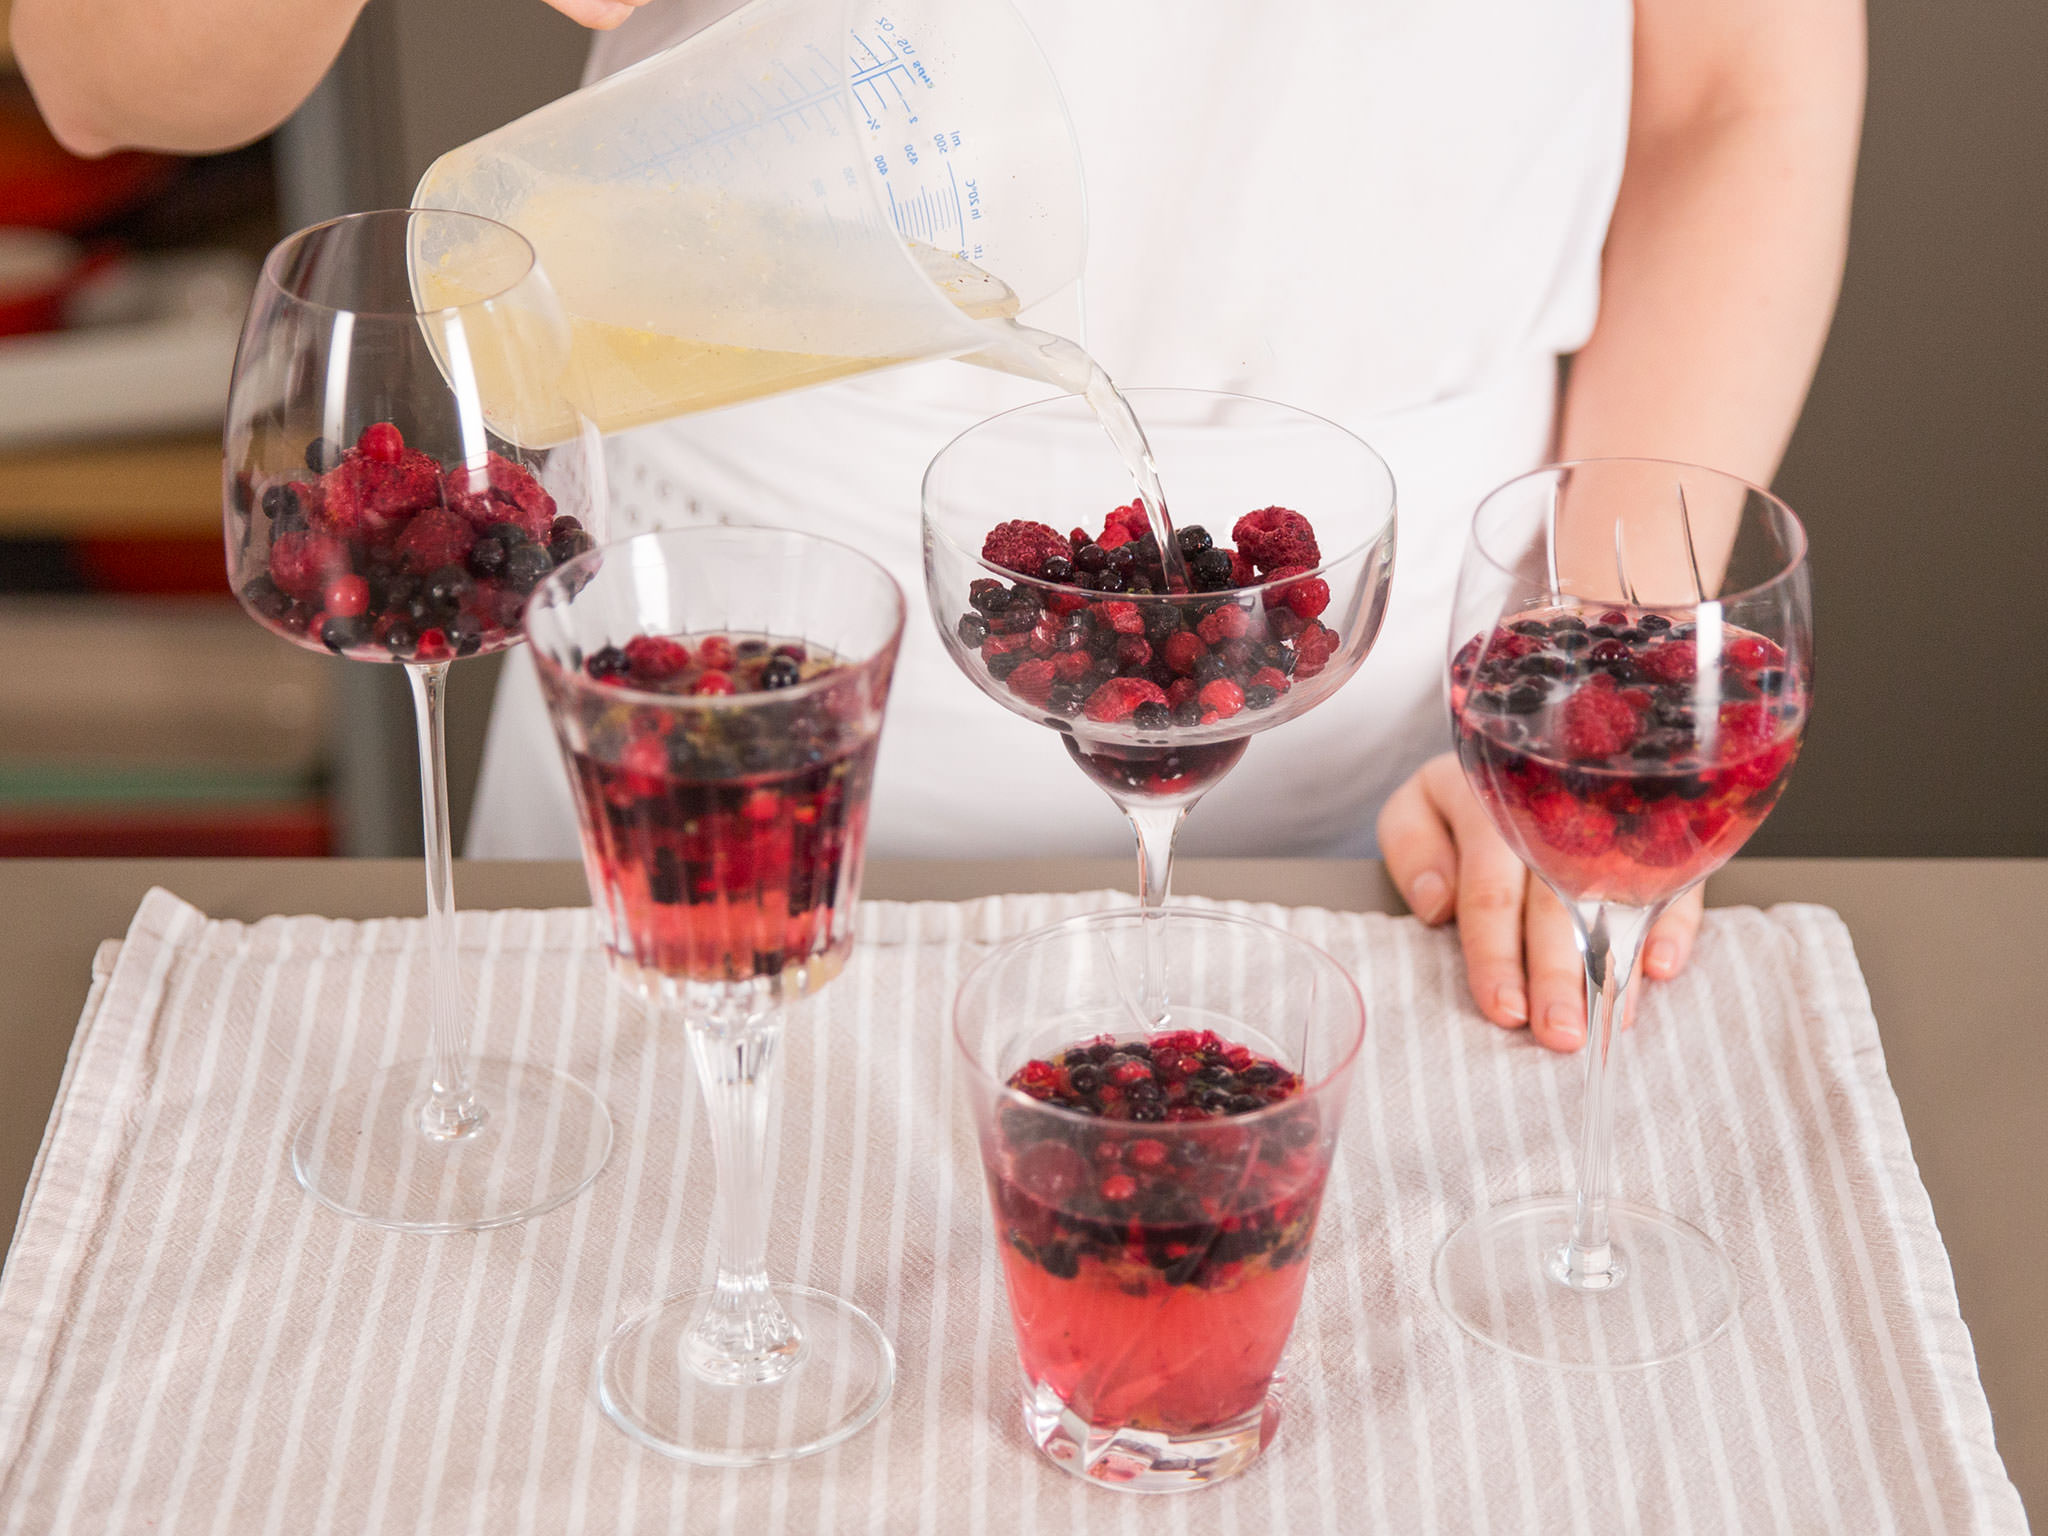 Refreshing prosecco creation with red berries